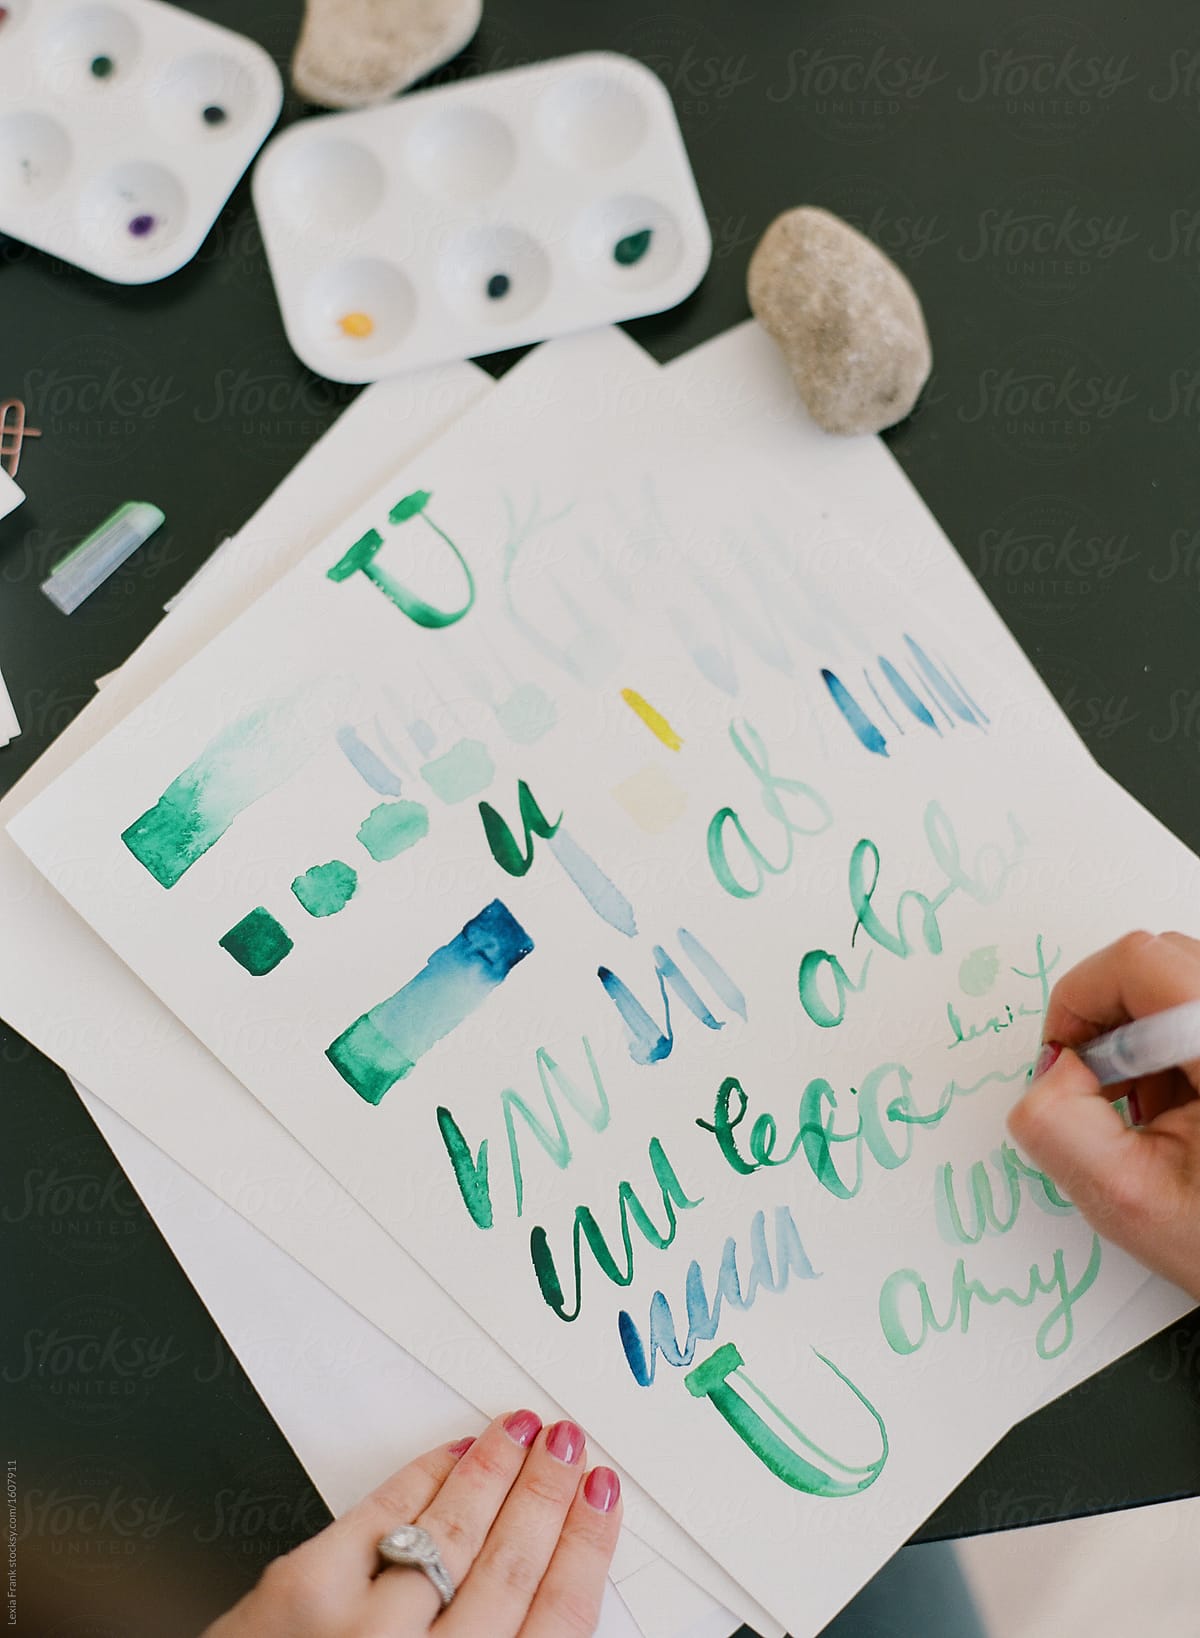 artists practice watercolor painting and hand lettering in outdoor classroom